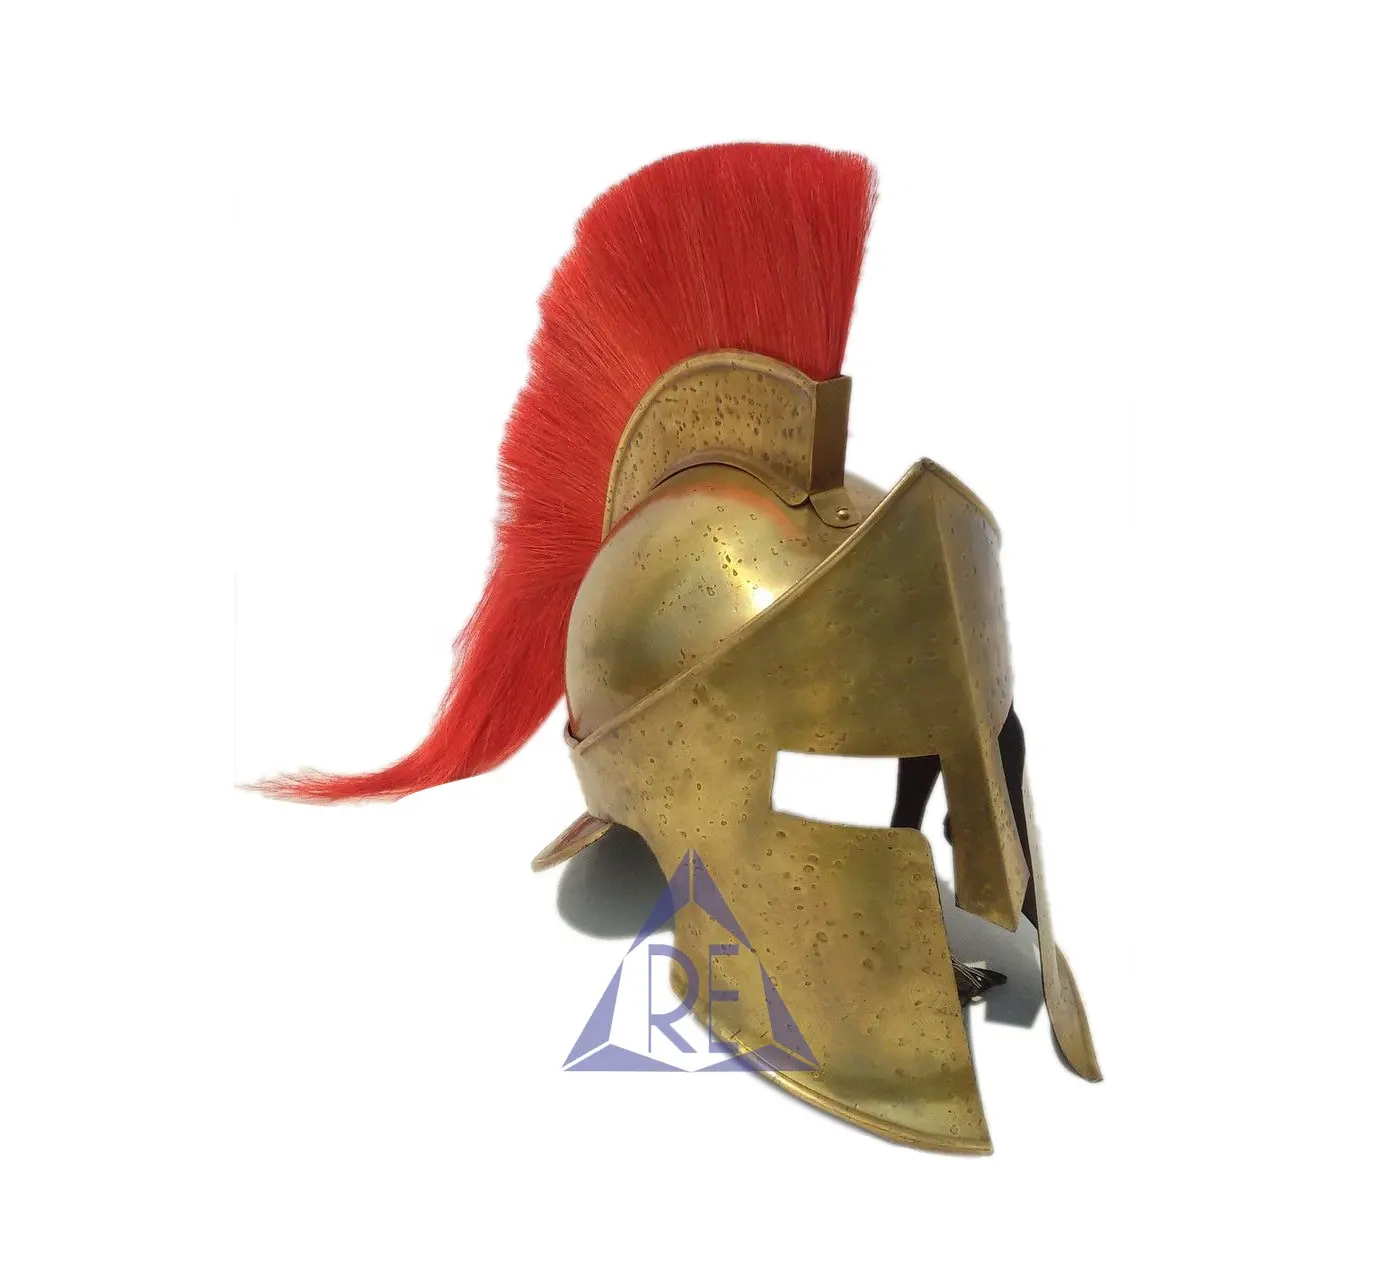 Medieval Spartan King Leonidas Greek Armour Helmet With Red Plume Costume Role Play Collectible Role Play Wearable Helmet